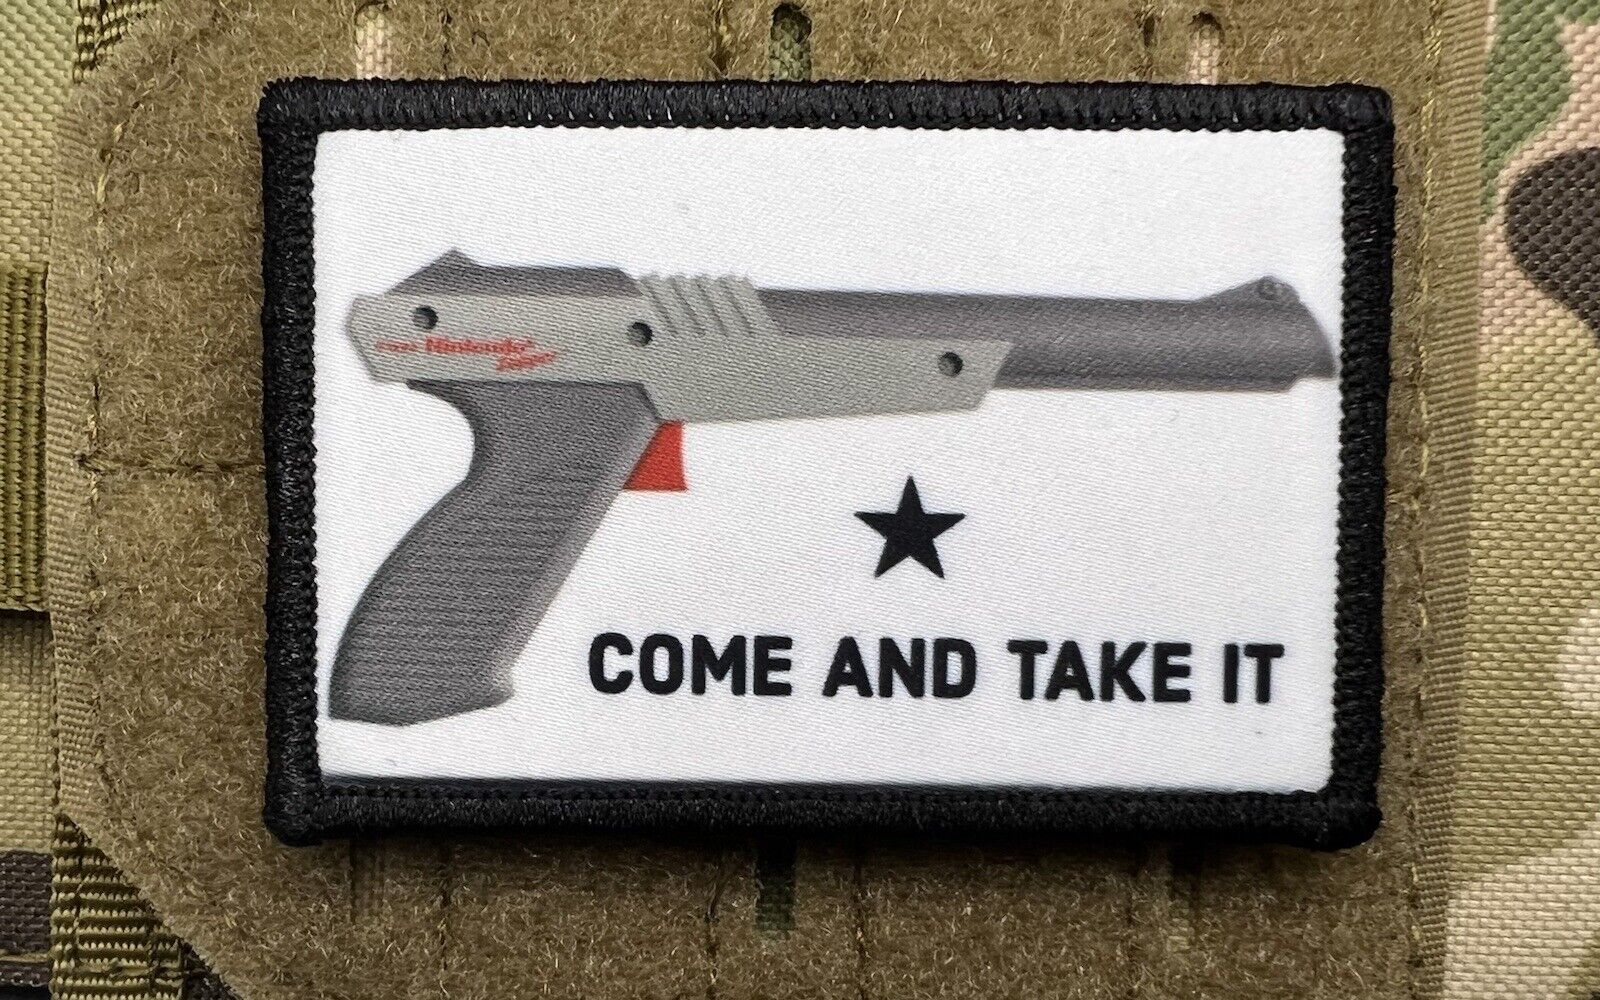 Nintendo Zapper Come And Take It Morale Patch / Military Badge Tactical Hook  99